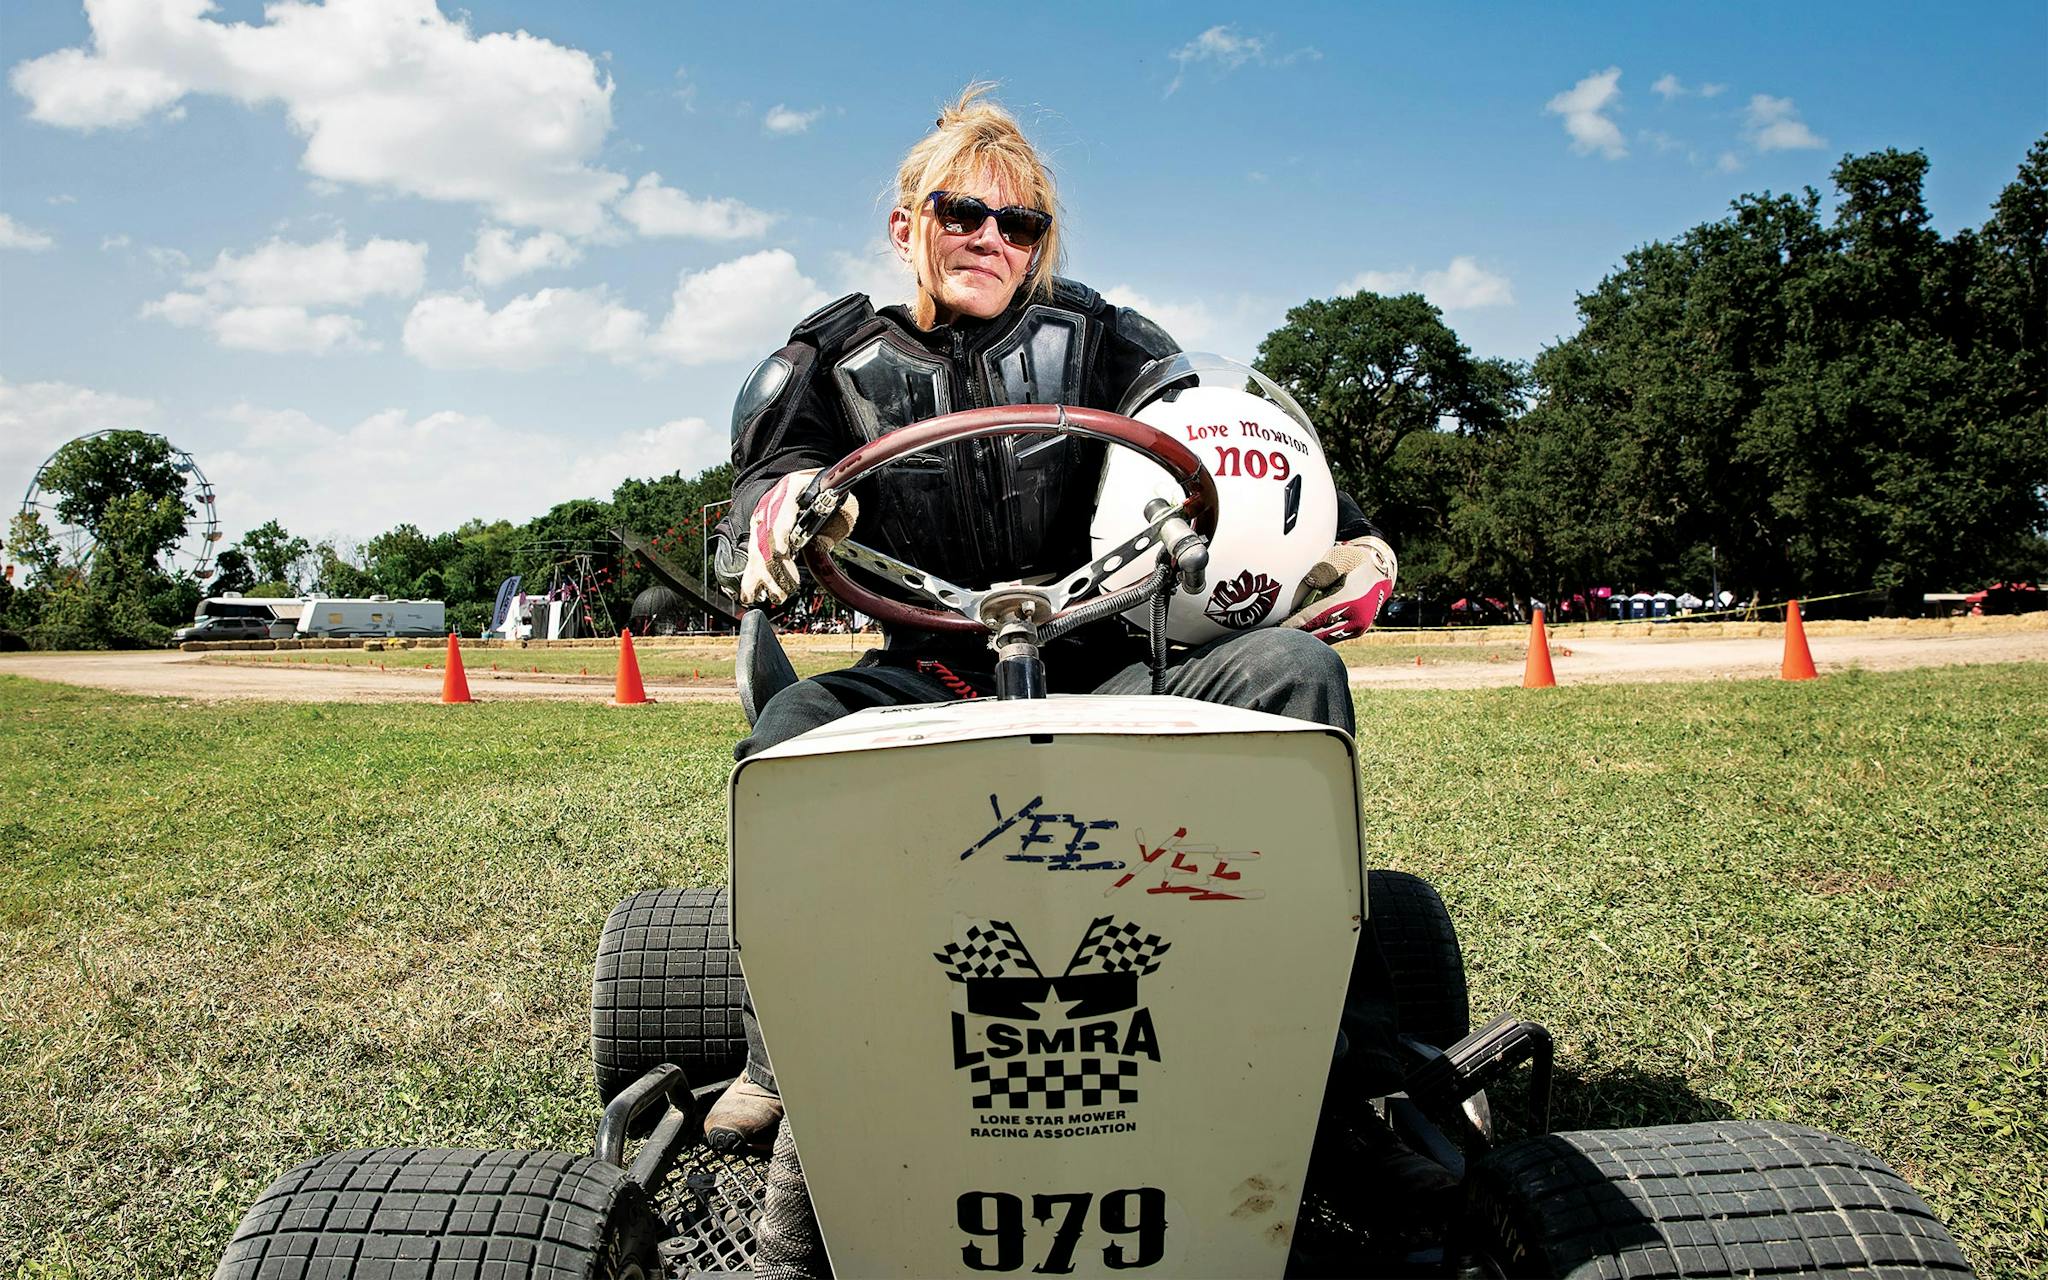 Racer Sammie Neel on her lawn mower at a competition in Boerne on September 4.